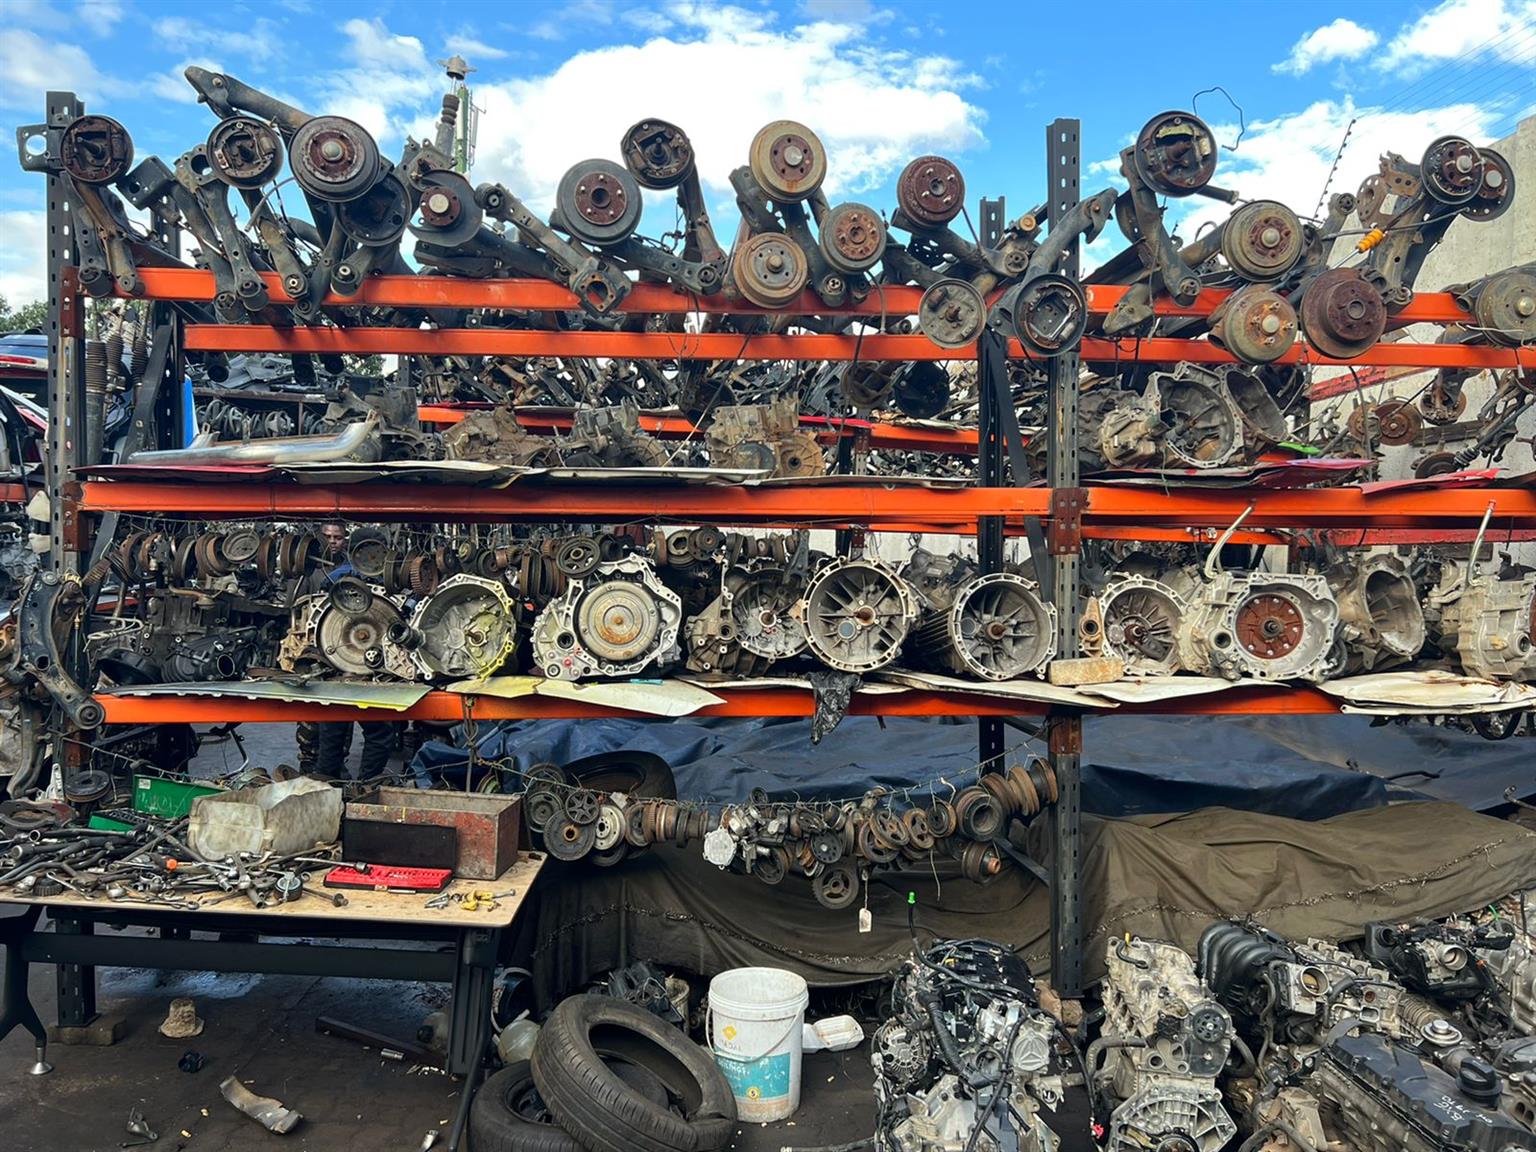 Motor Engines and gearboxes for sale